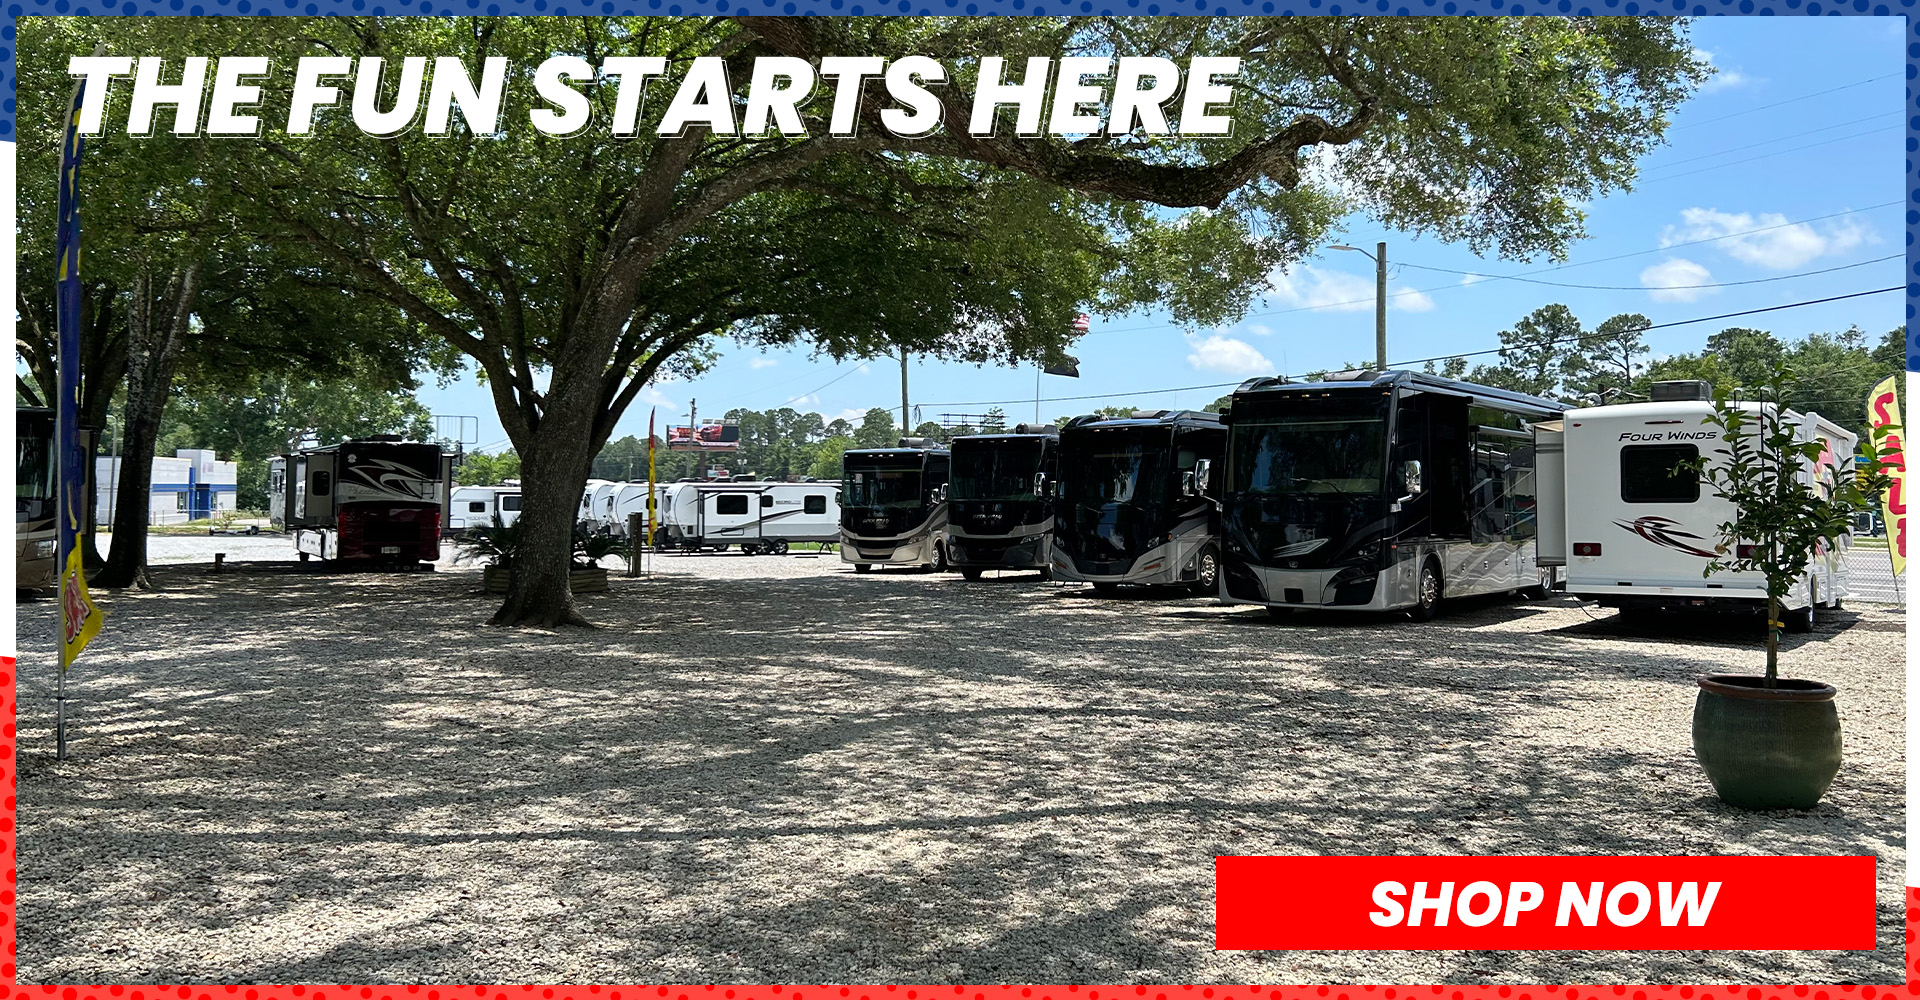 Campers & RVs For Sale Near Panama City, FL